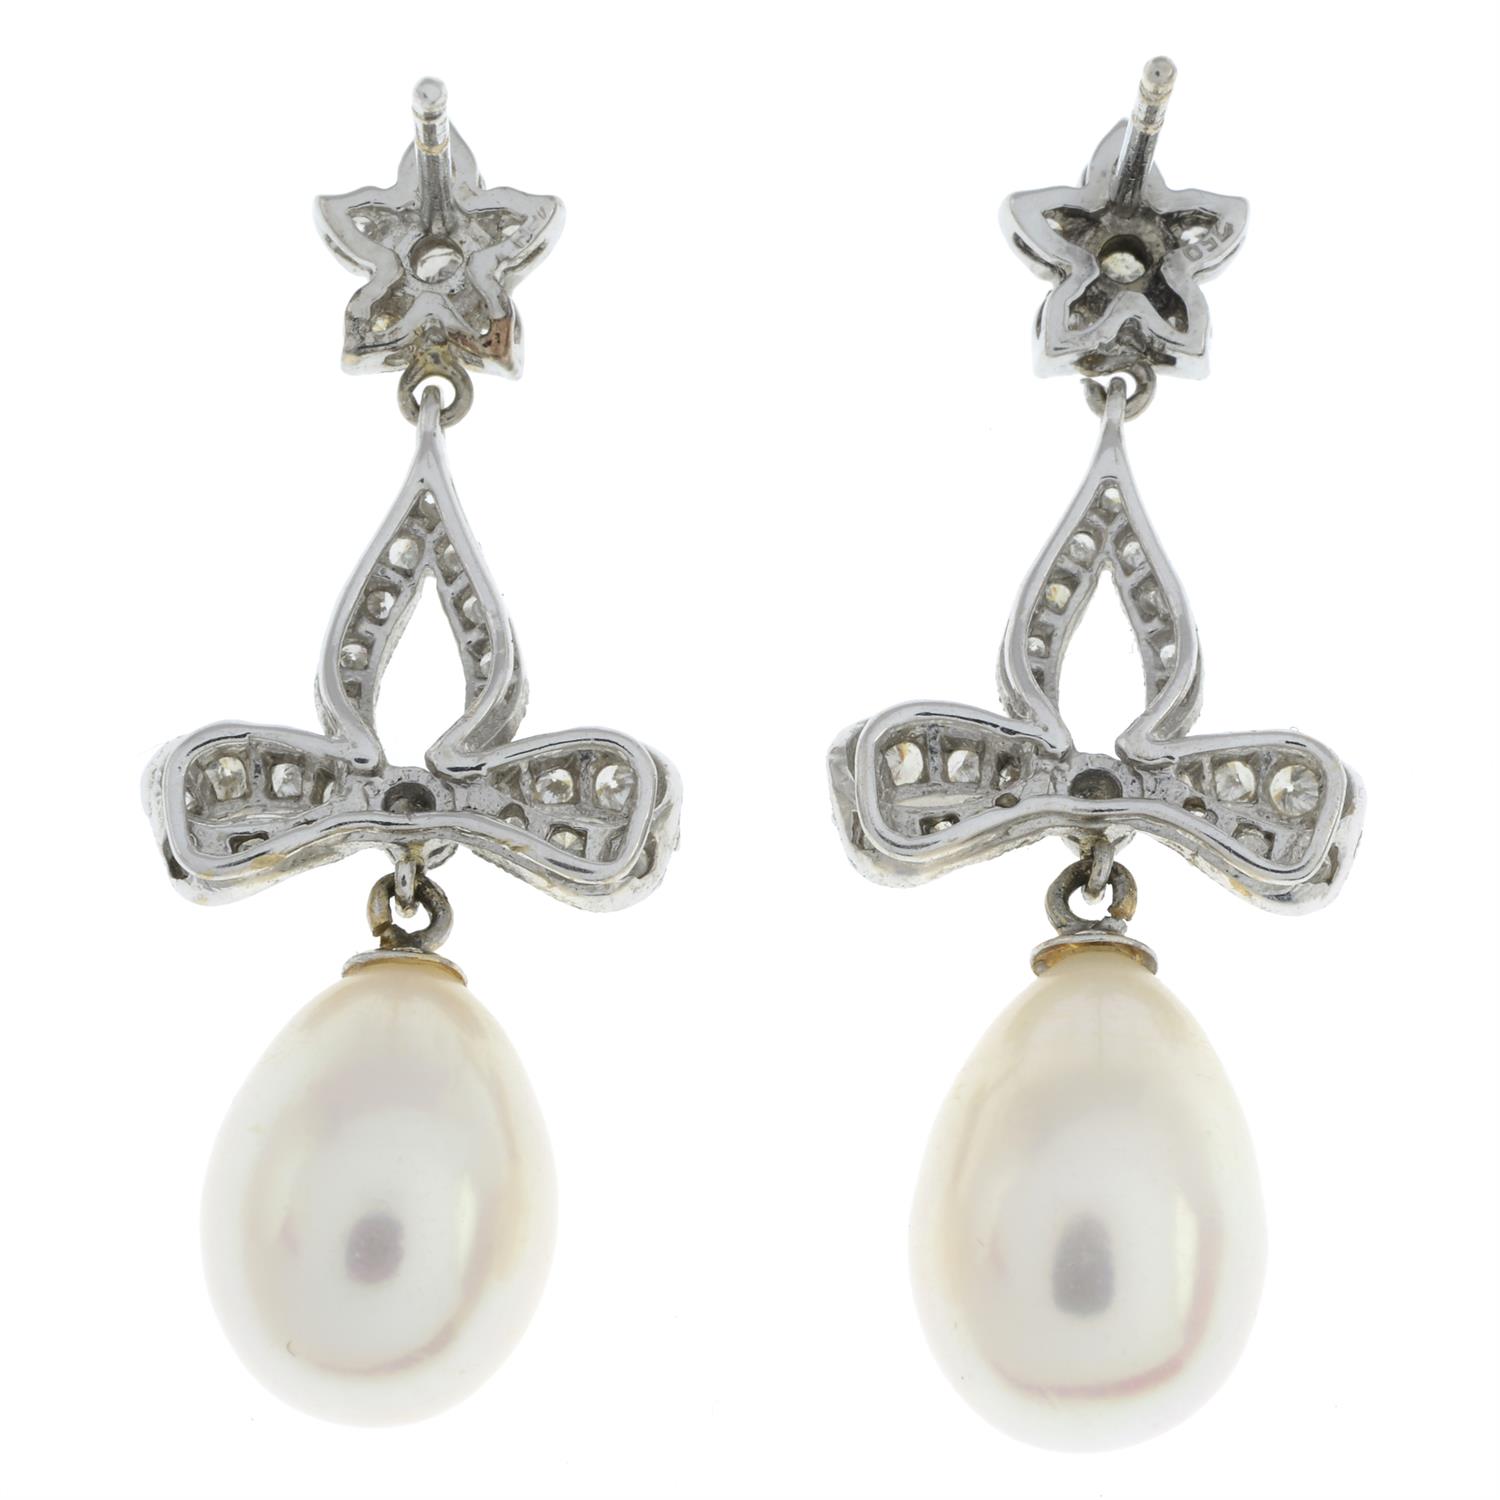 Cultured pearl and diamond earrings - Image 3 of 4